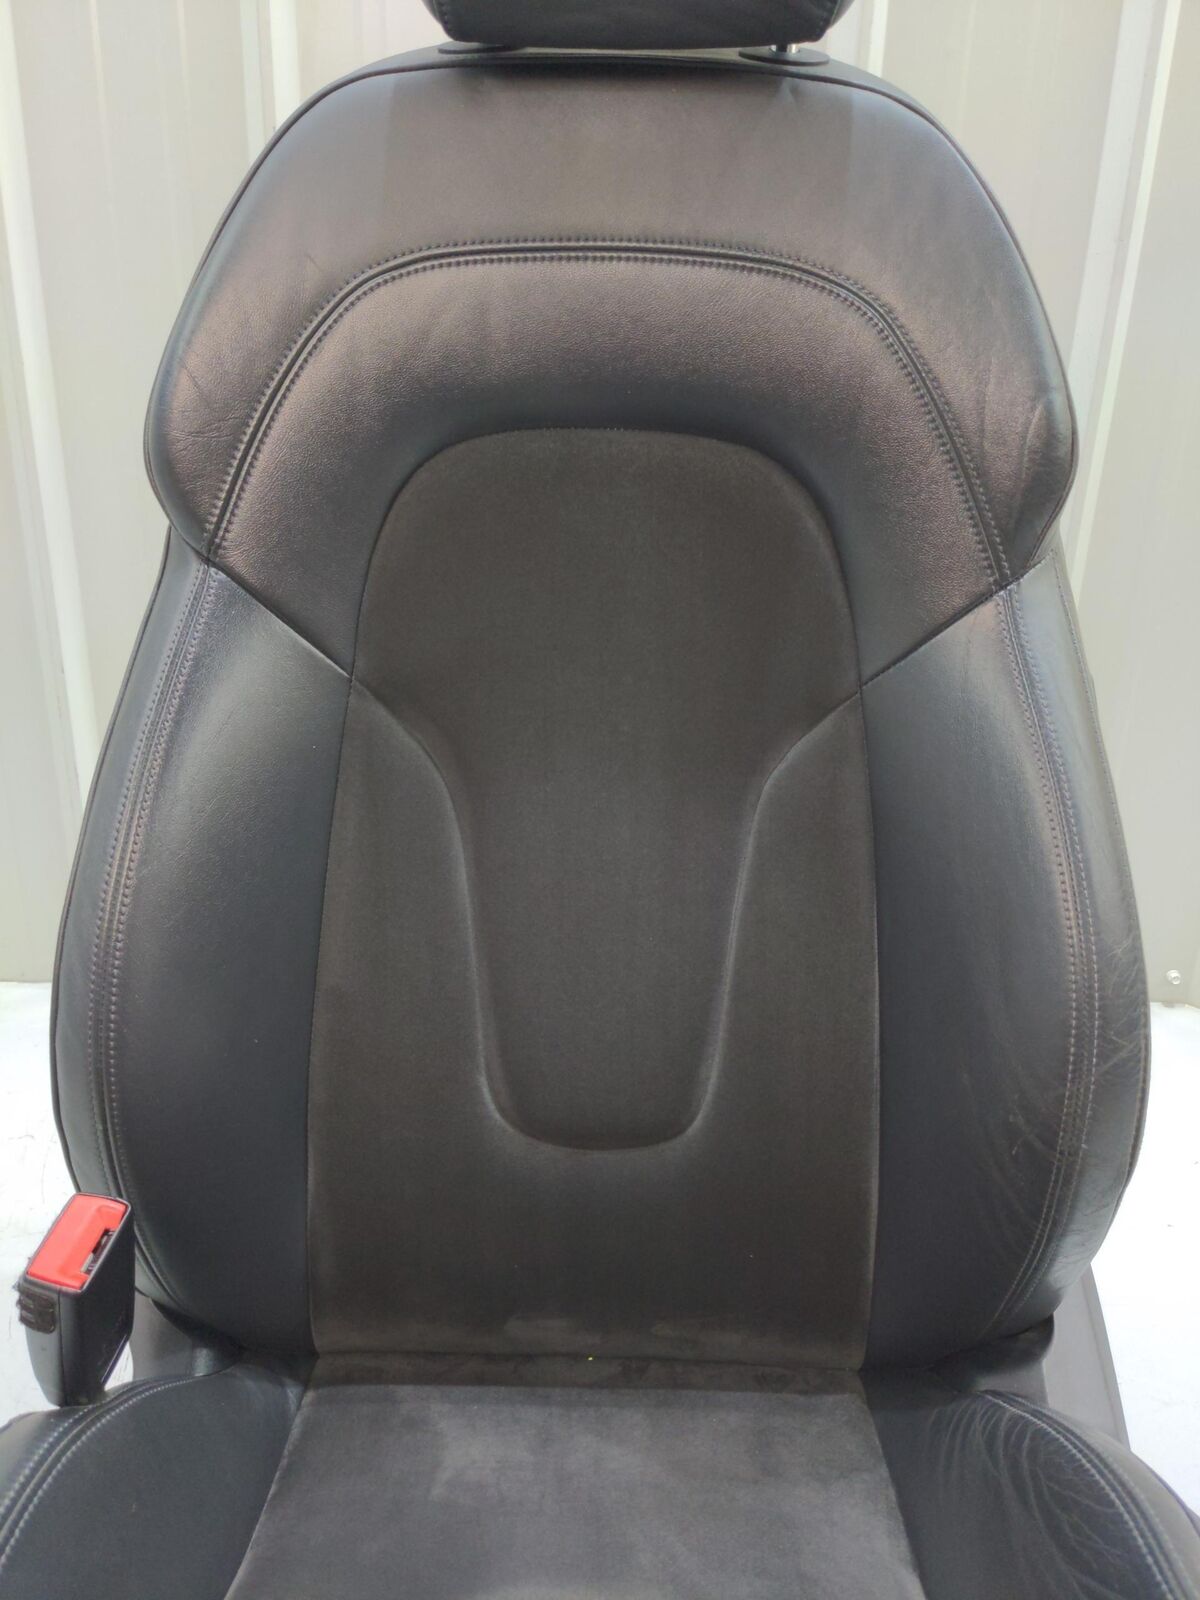 08-10 AUDI R8 Front Seat Lh Left Driver Black *outer Bolsters Has Wear* 54K KM'S